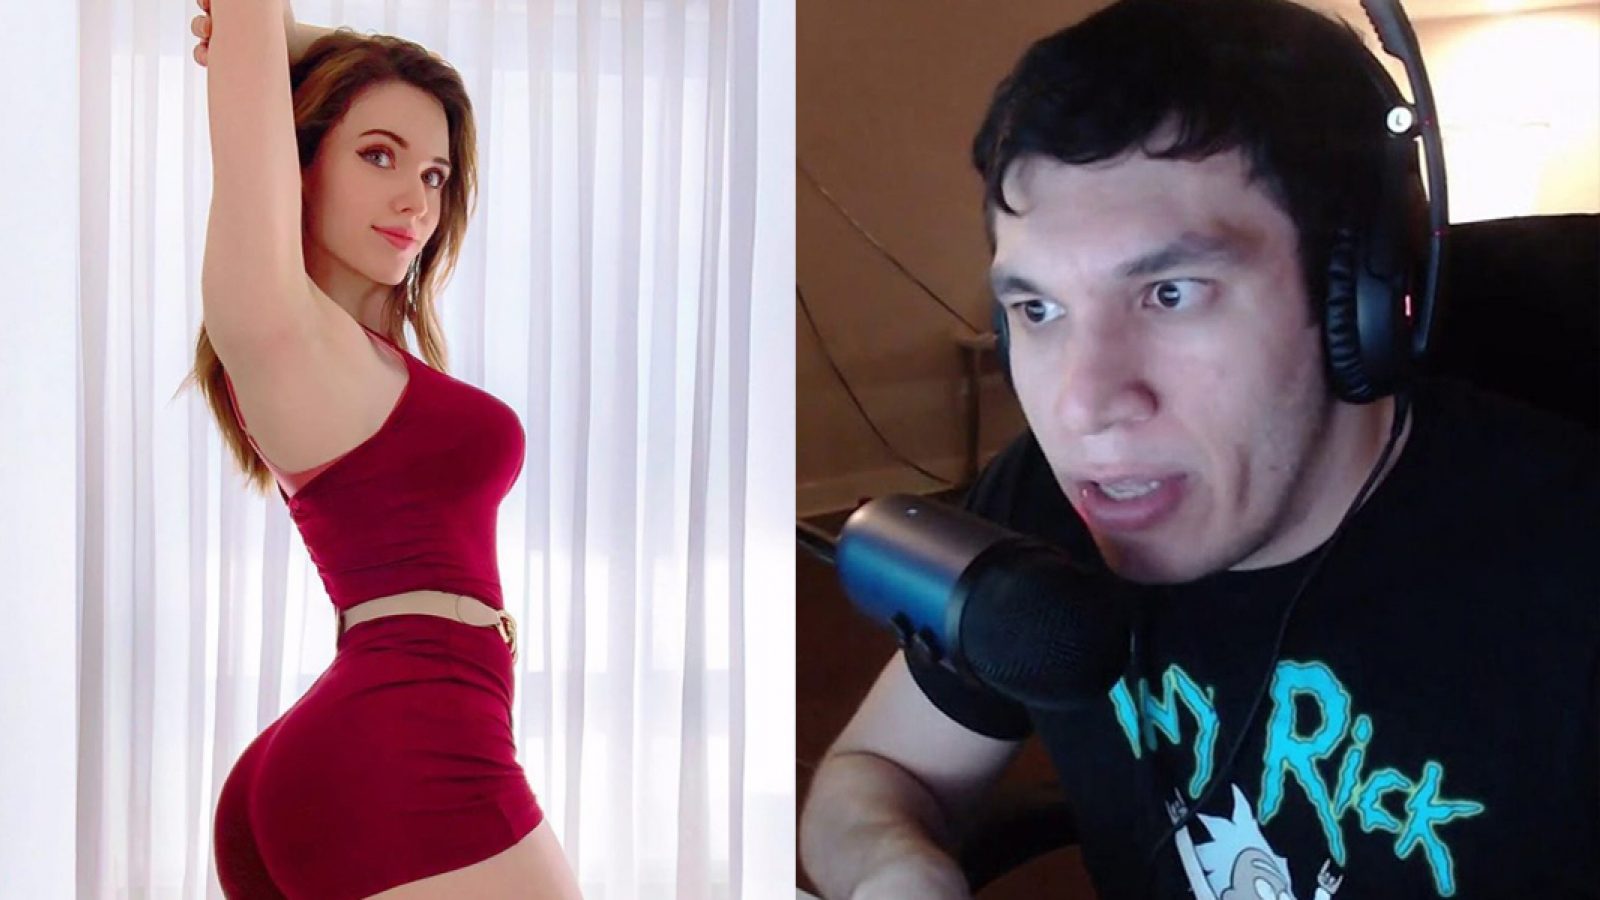 Amouranth Banned Clip